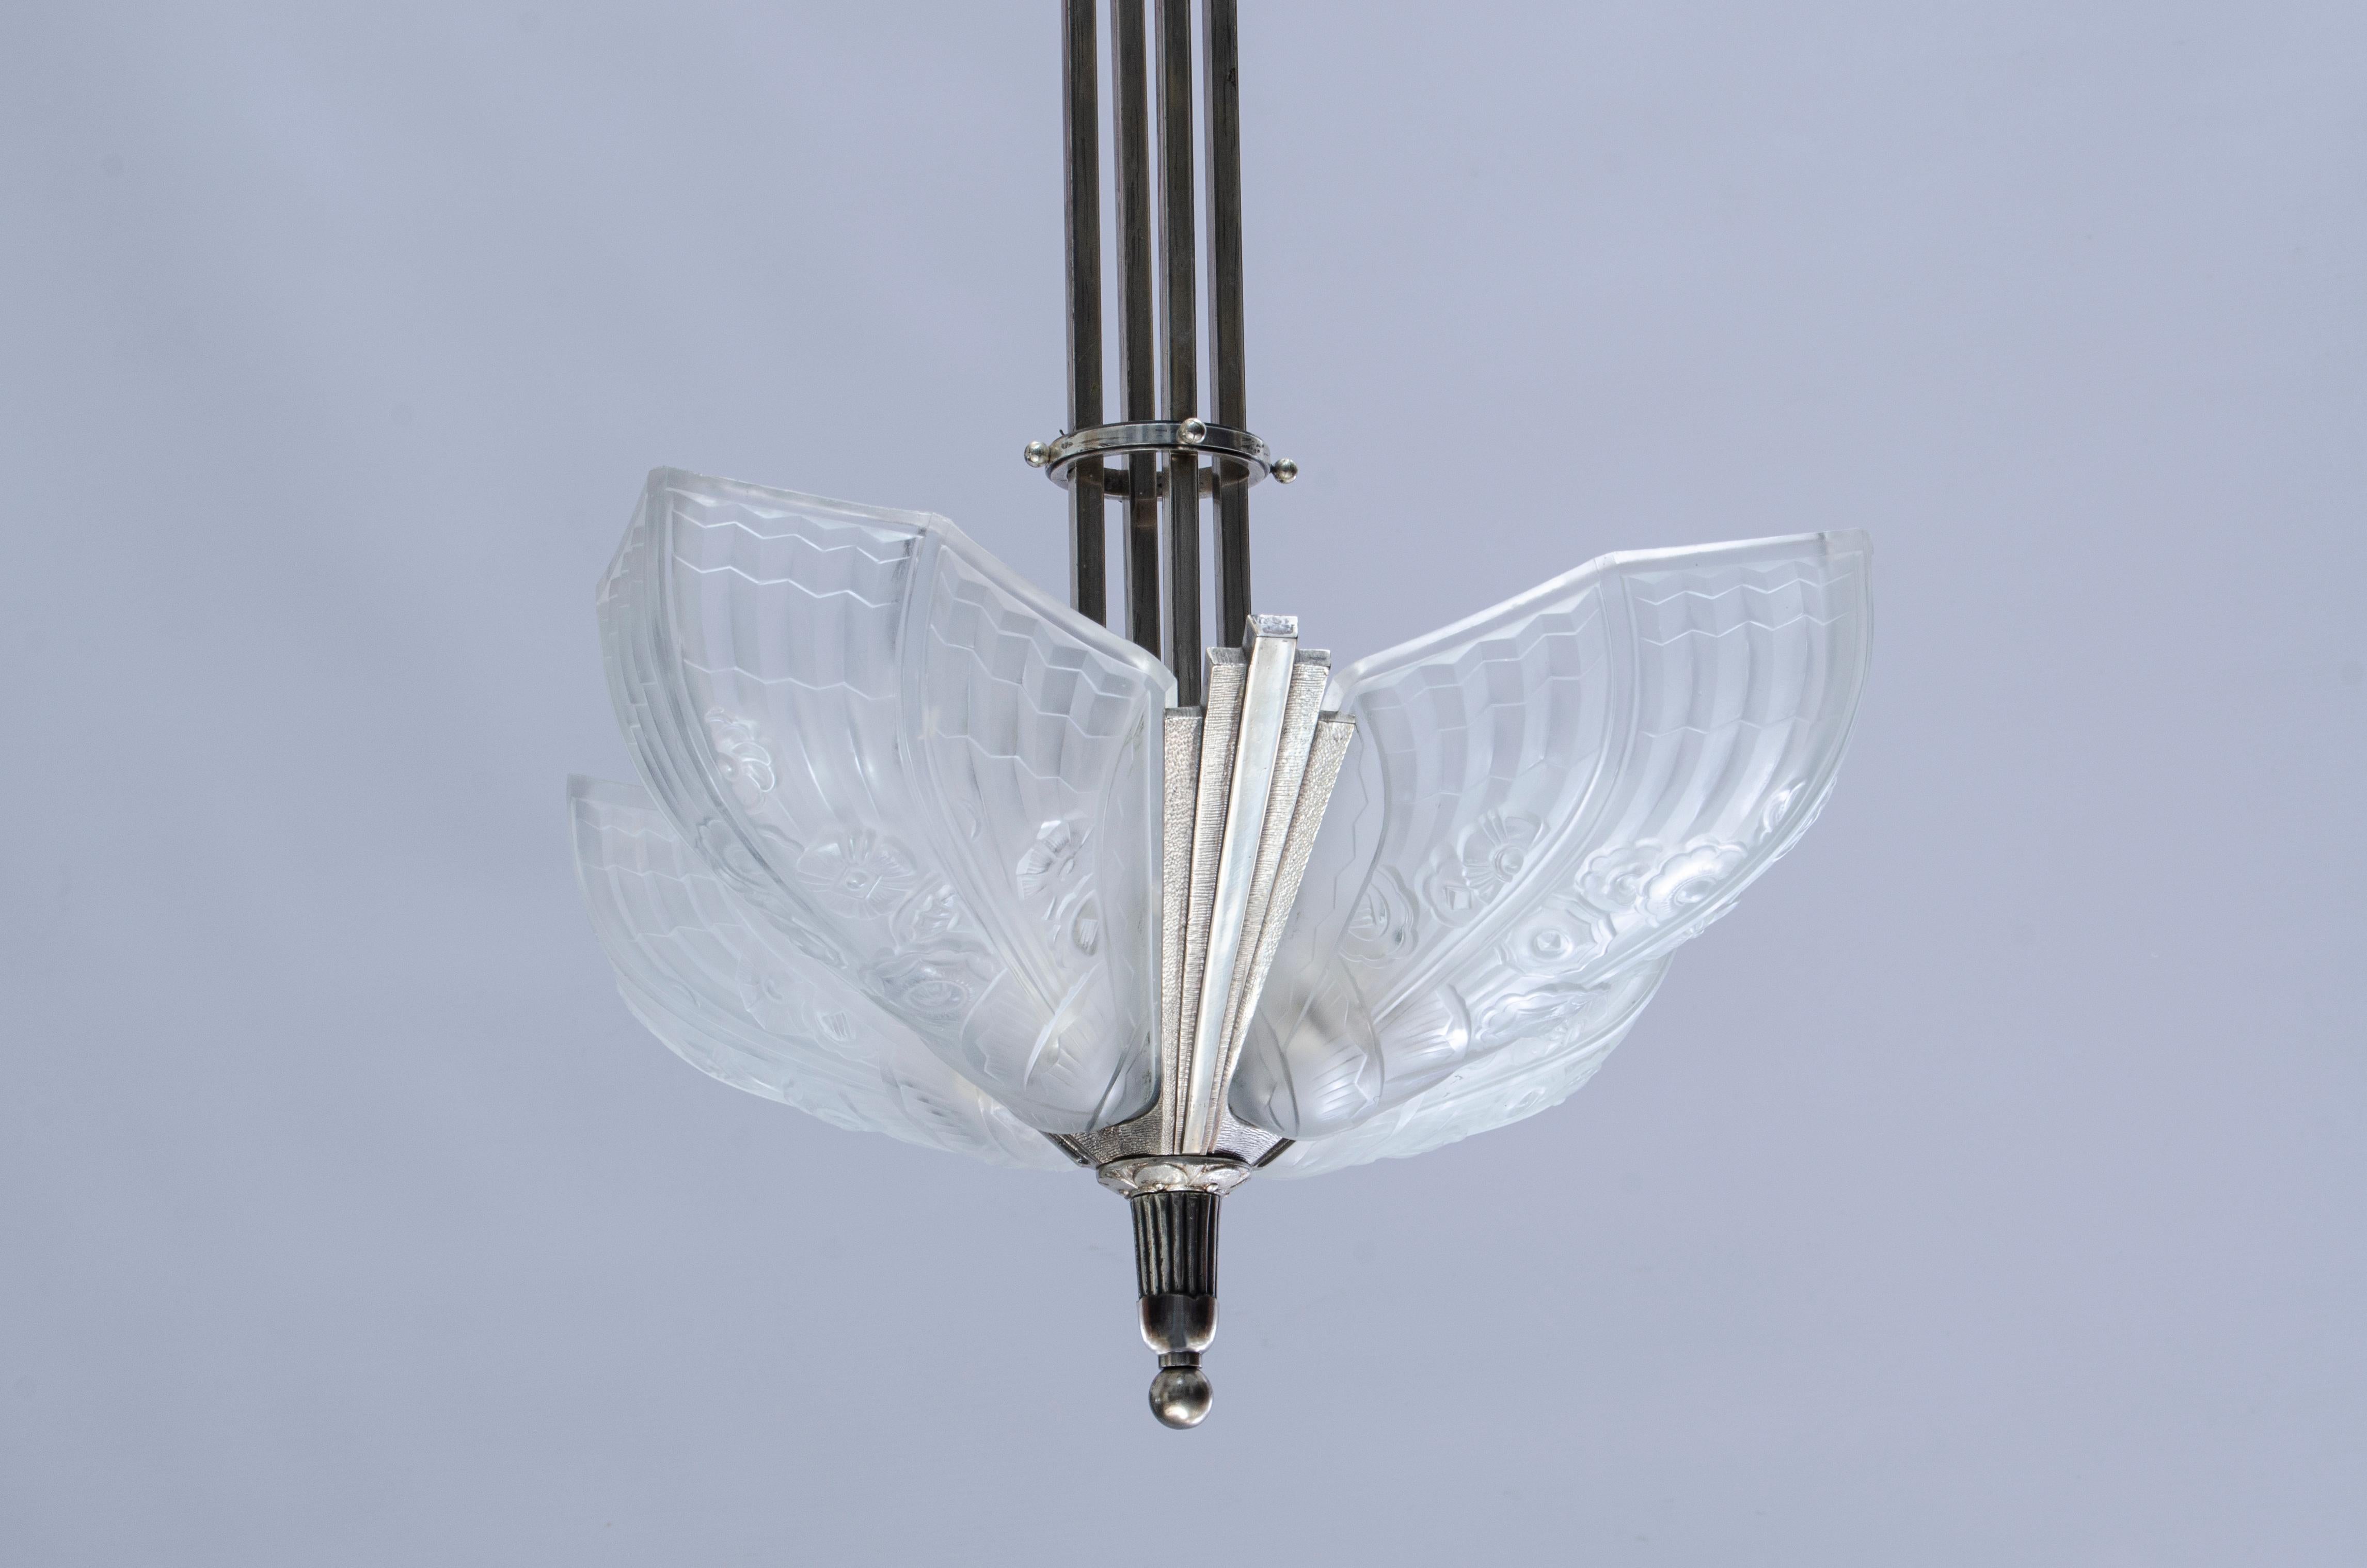 Hanging light with glass shades by EJG (Etablissements Jean Gauthier). Silverplated bronze with satin glass shades. 

France, CIRCA 1930.